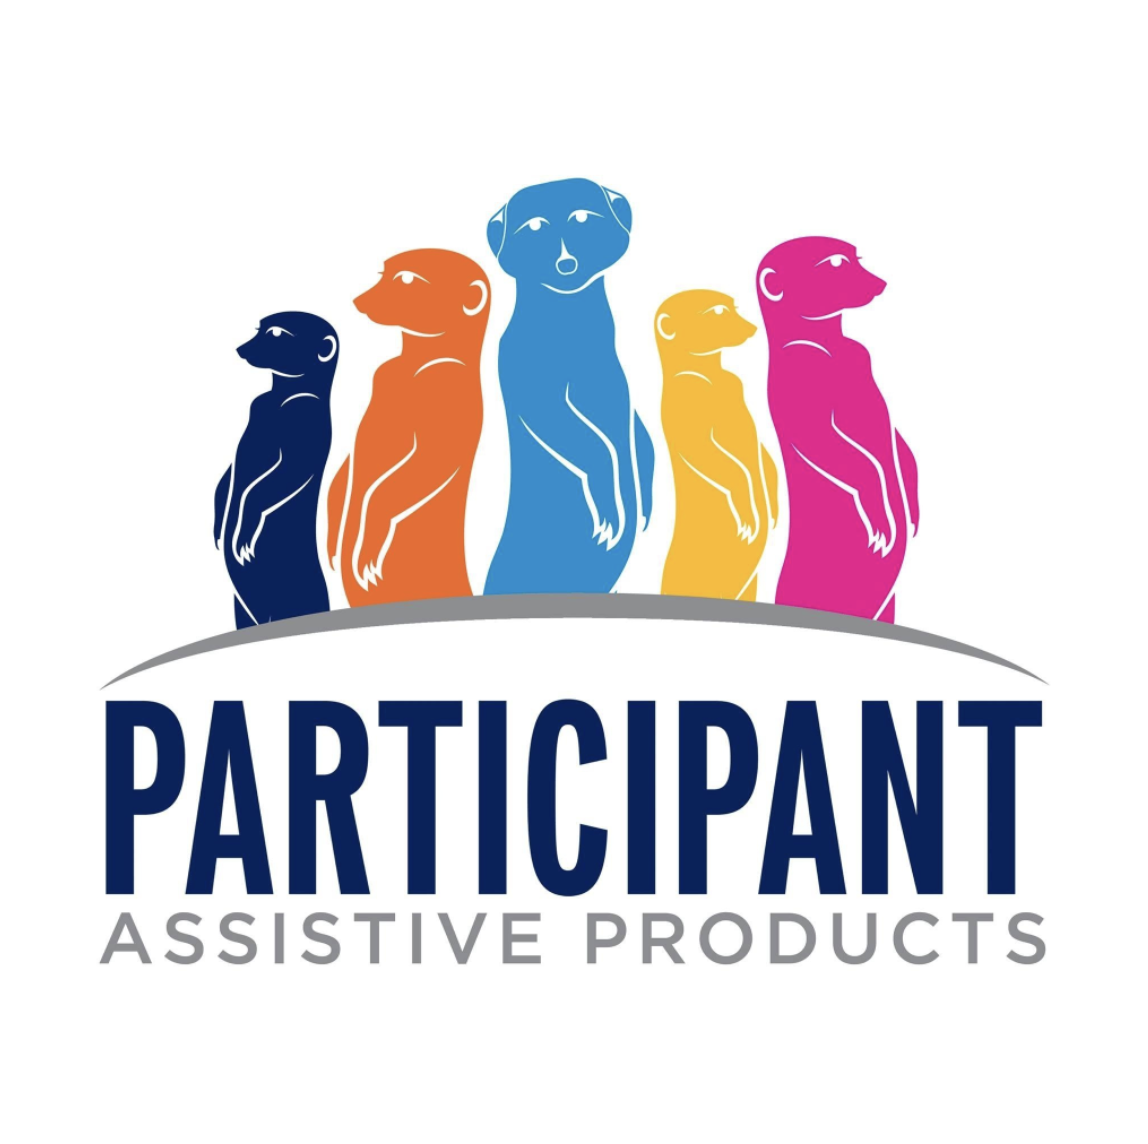 5 meerkats above a half moon with the words Participant Assistive Products underneath